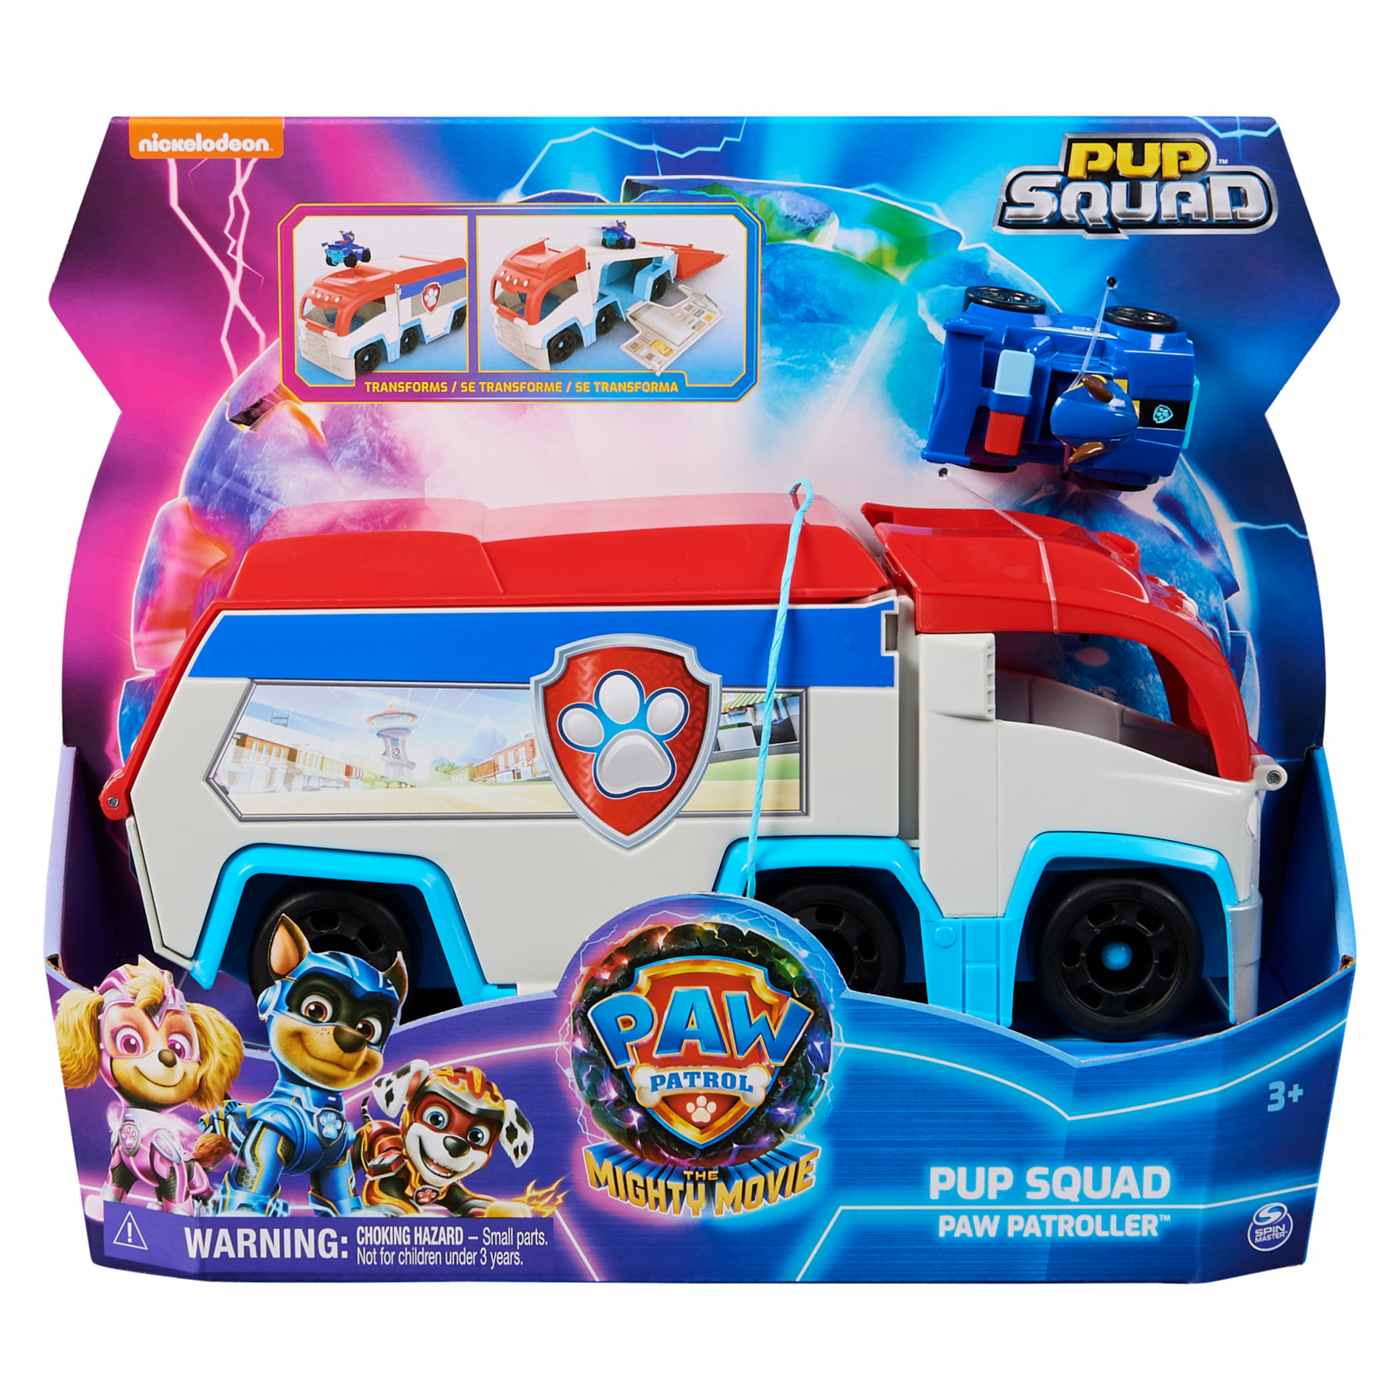 Paw Patrol The Mighty Movie Pup Squad Paw Patroller; image 1 of 4